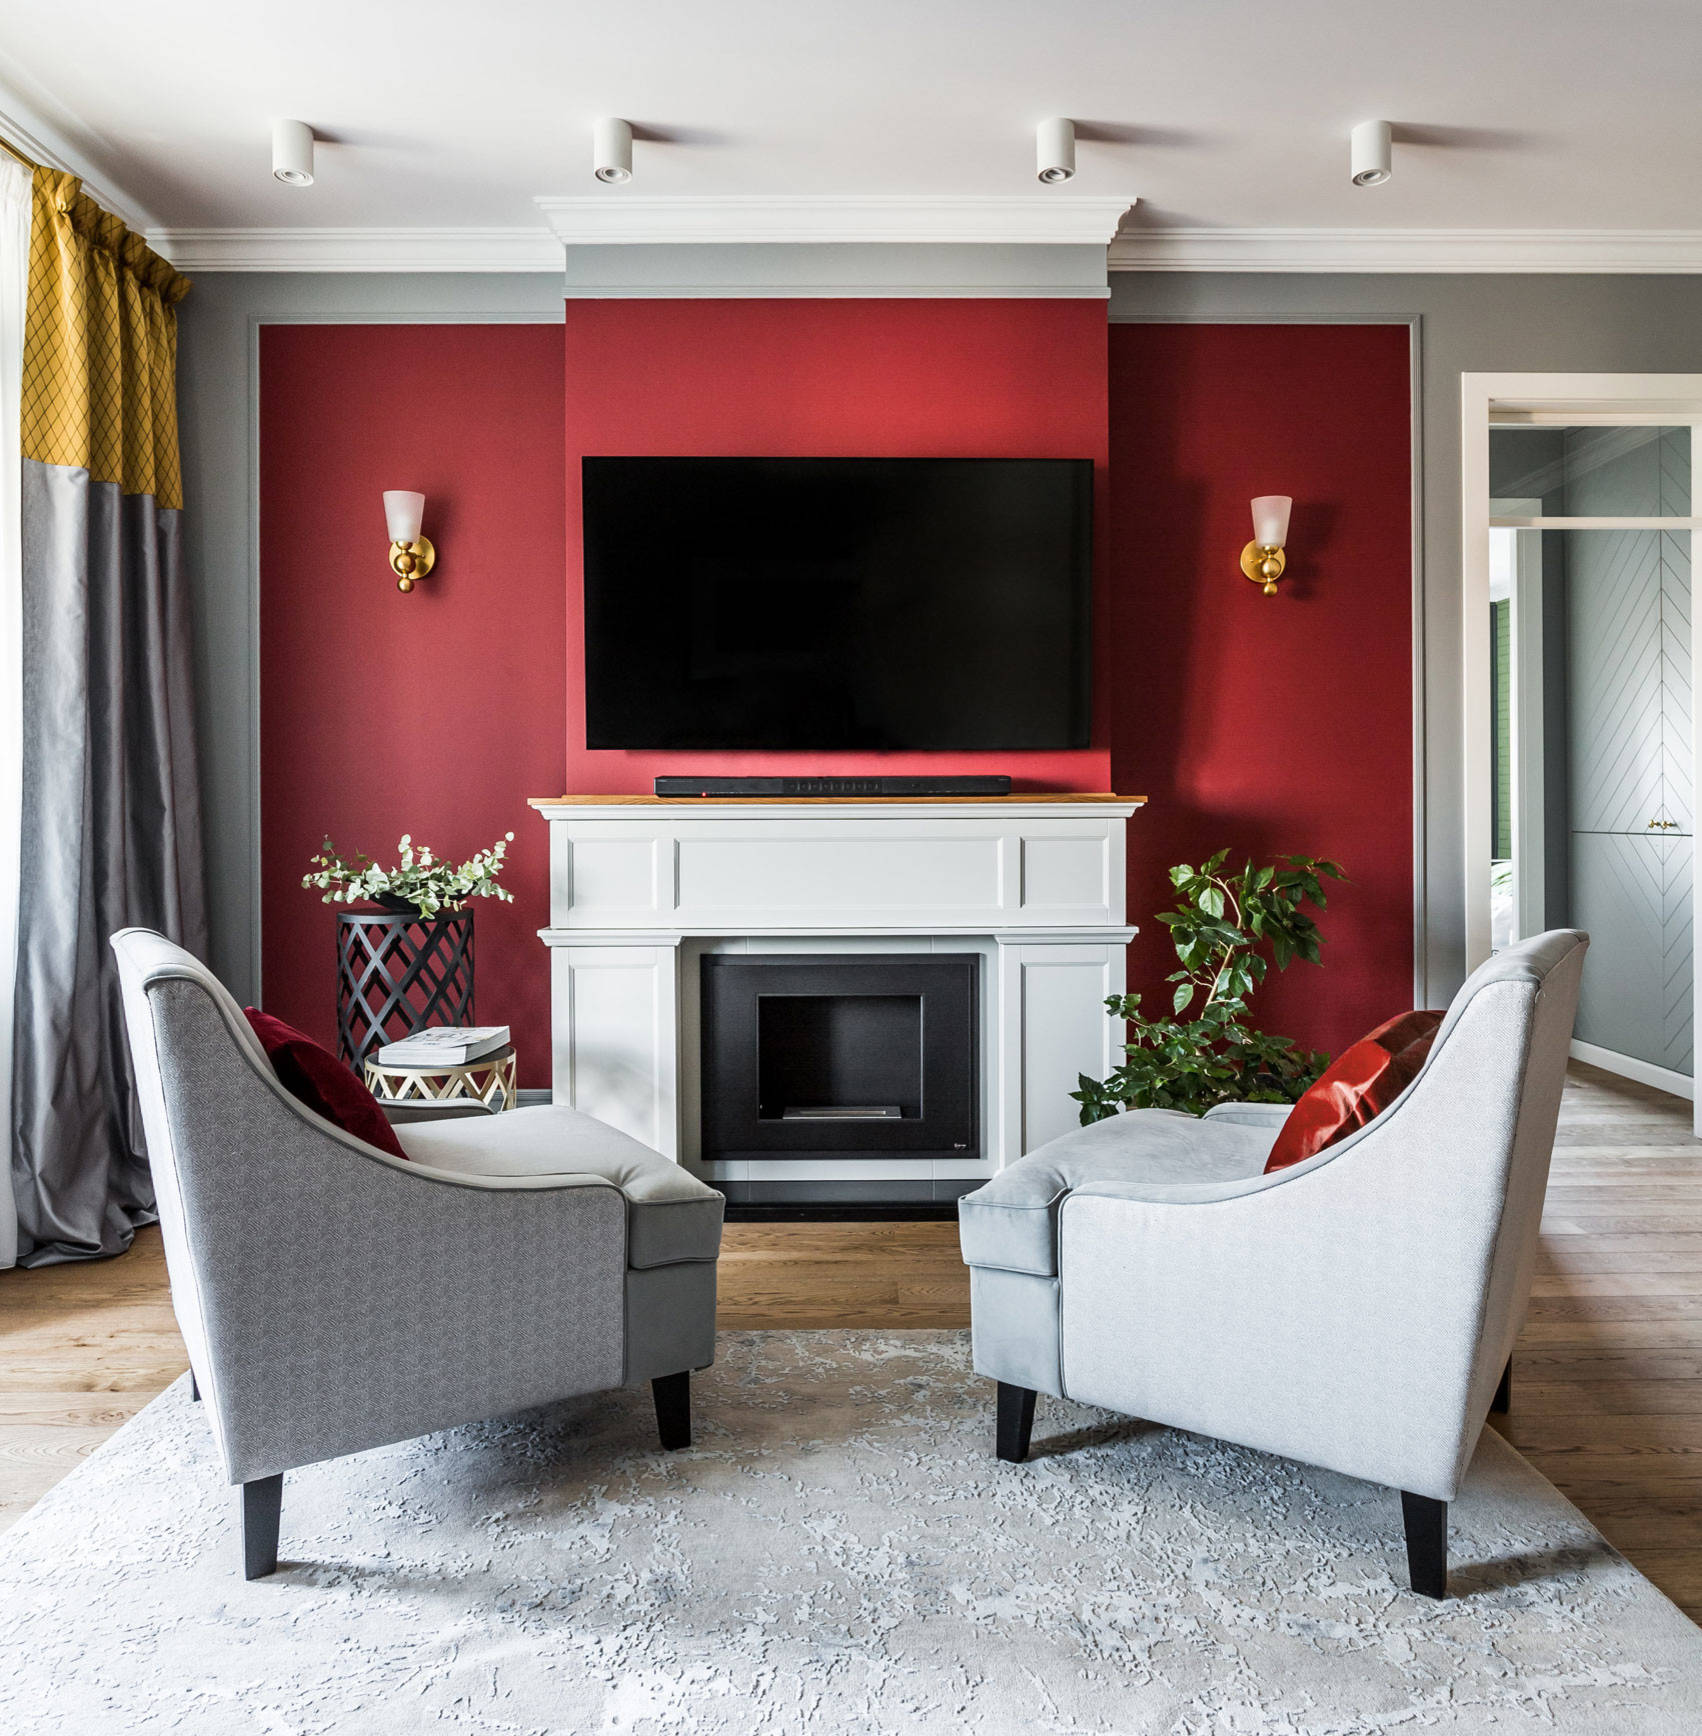 75 Living Room with Red Walls Ideas You'll Love - December, 2022 | Houzz